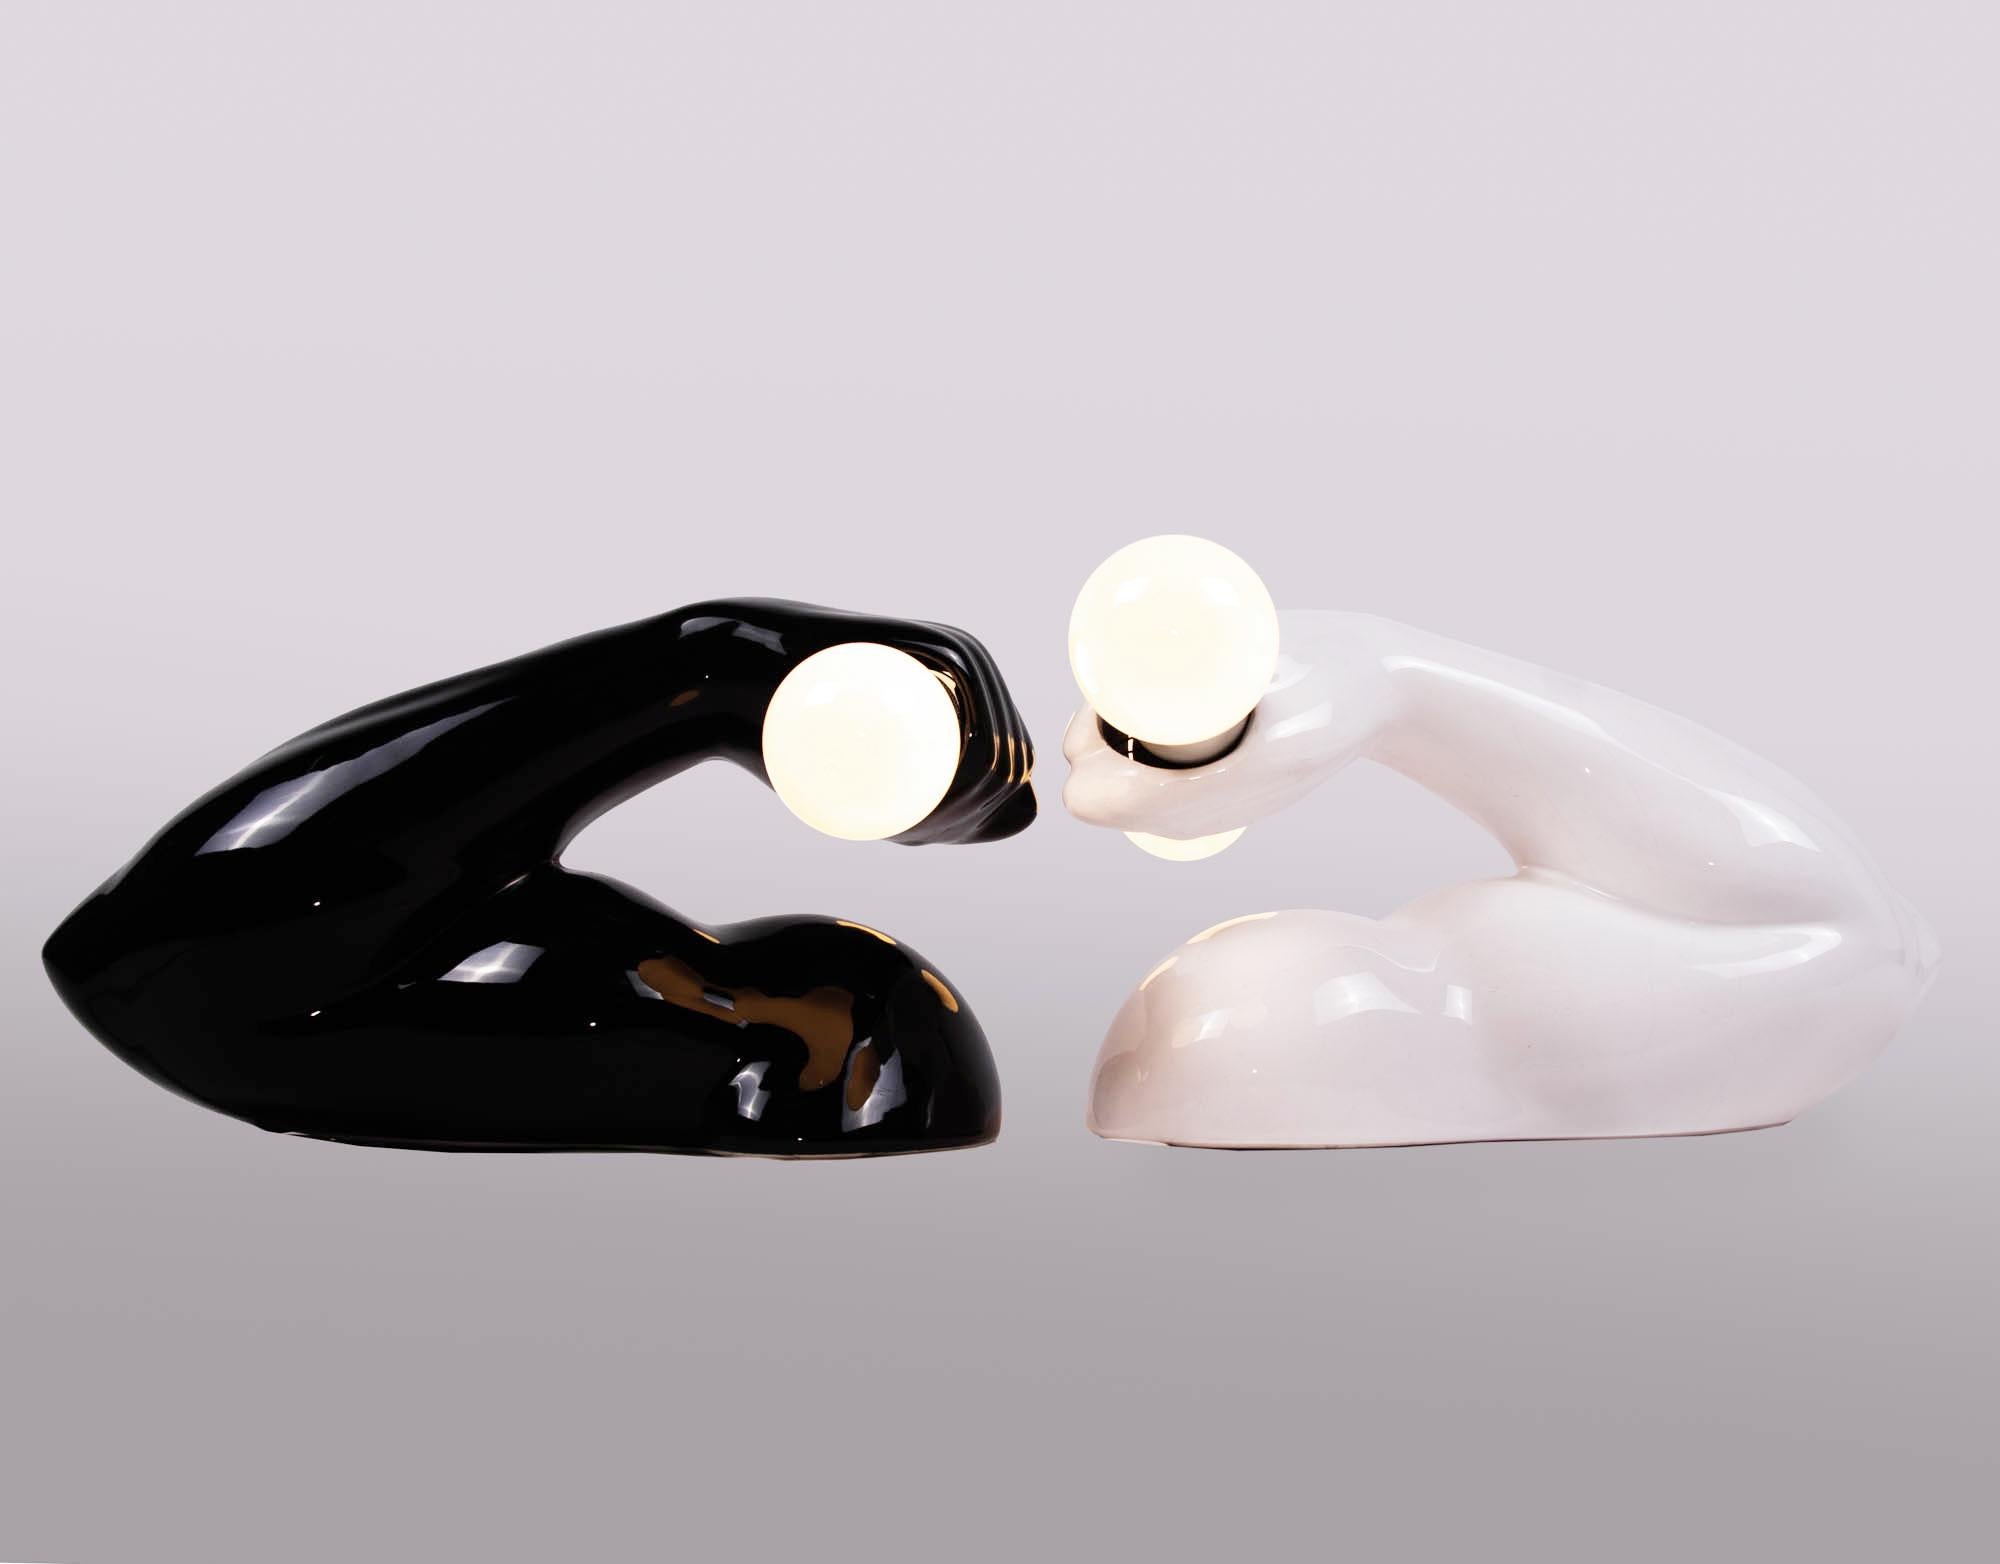 1980 French J.C. Peiré Pair of Black & White Ceramic Biceps Wall Lights For Sale 2